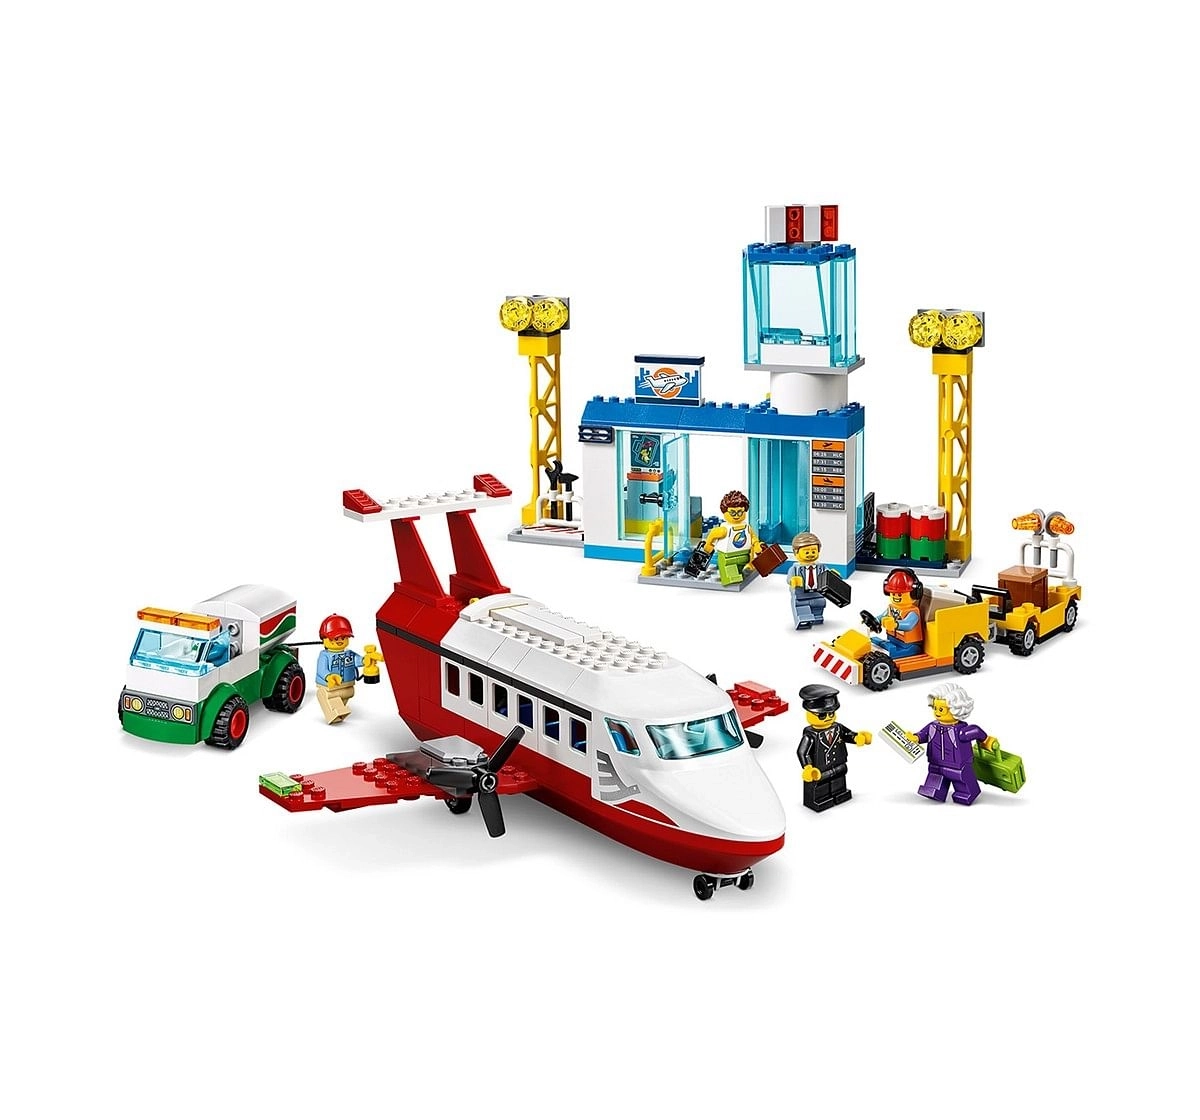 LEGO 60261 Central Airport Lego Blocks for Kids age 4Y+ 